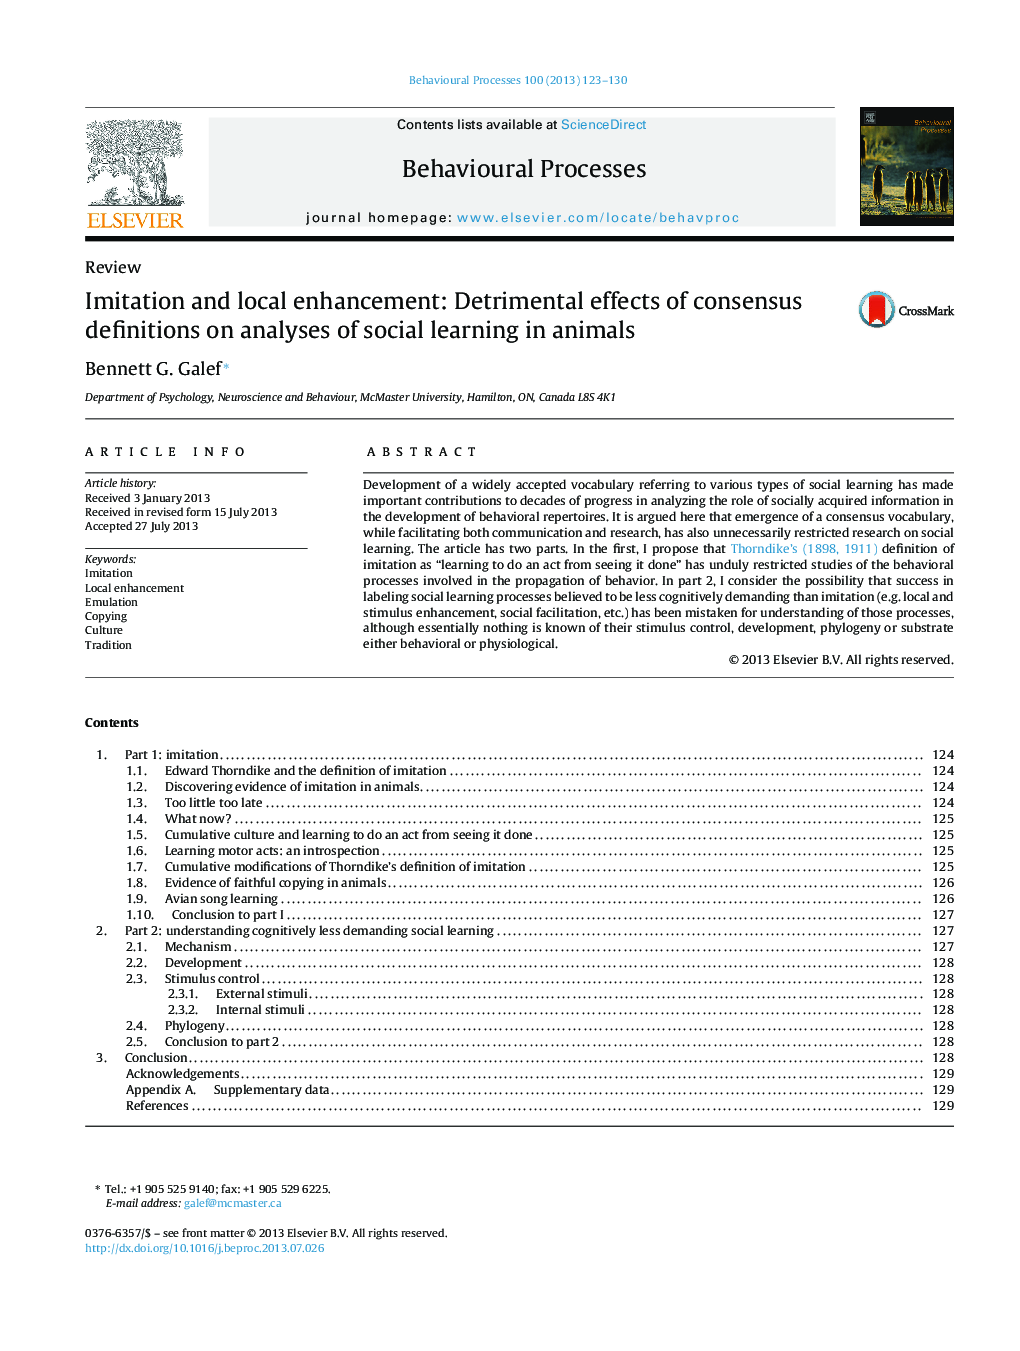 Imitation and local enhancement: Detrimental effects of consensus definitions on analyses of social learning in animals